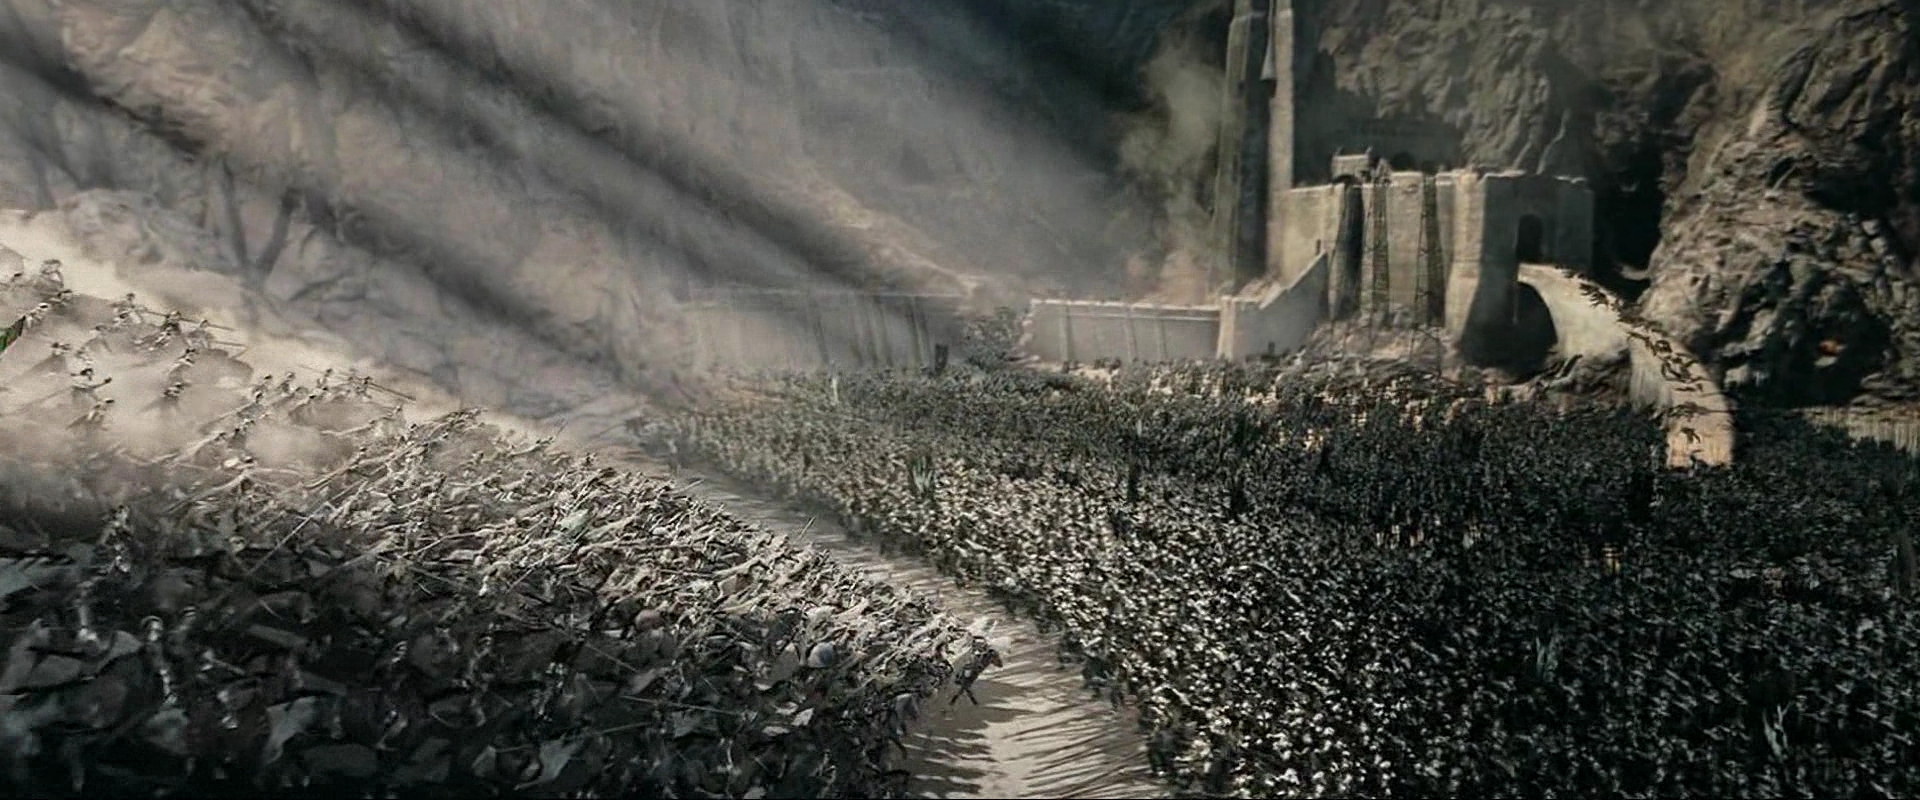 The Battle of Helm's Deep in The Lord of the Rings: The Two Towers (2002)